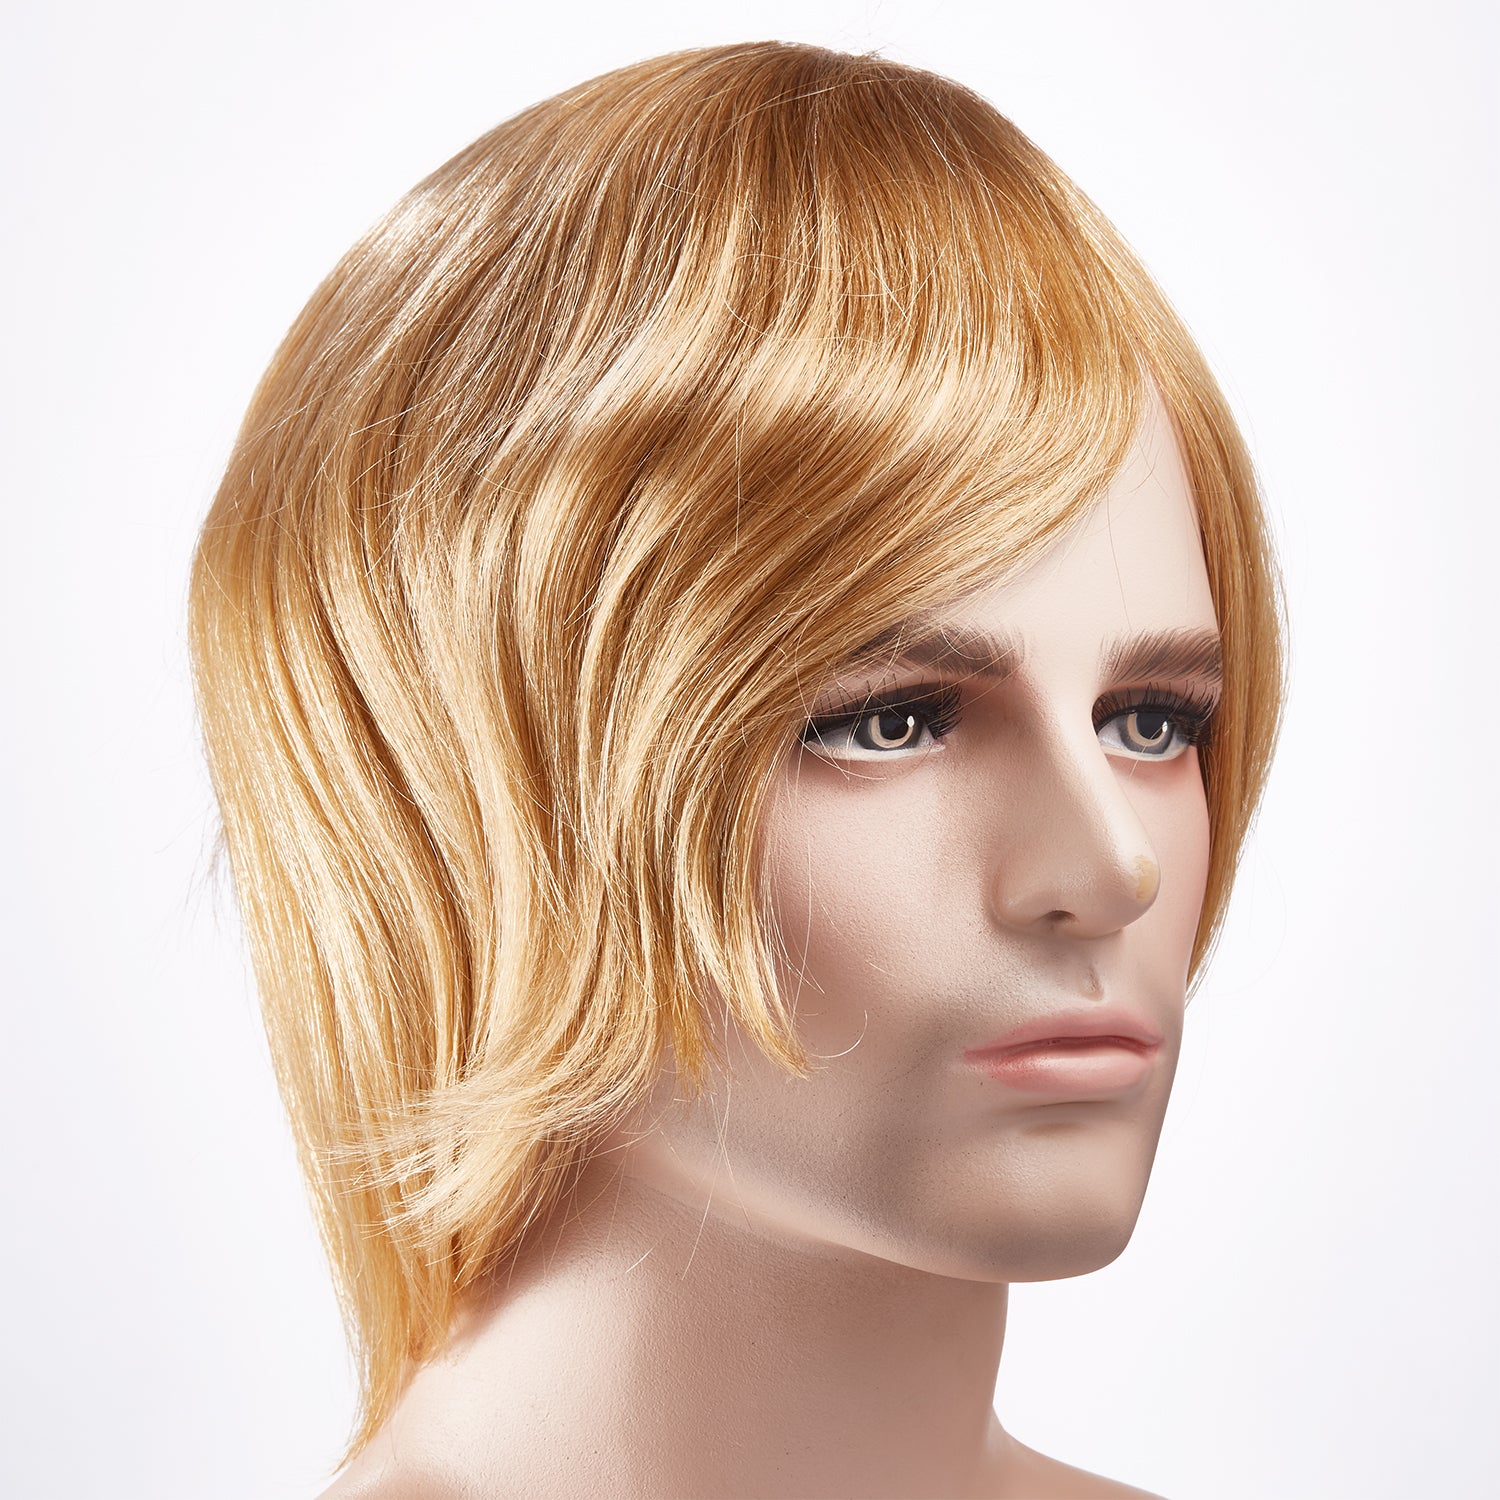 Load image into Gallery viewer, 0.06 Transparent Skin Poly Flat Injected Mens Stock Hair System Hair Length 8 Inches